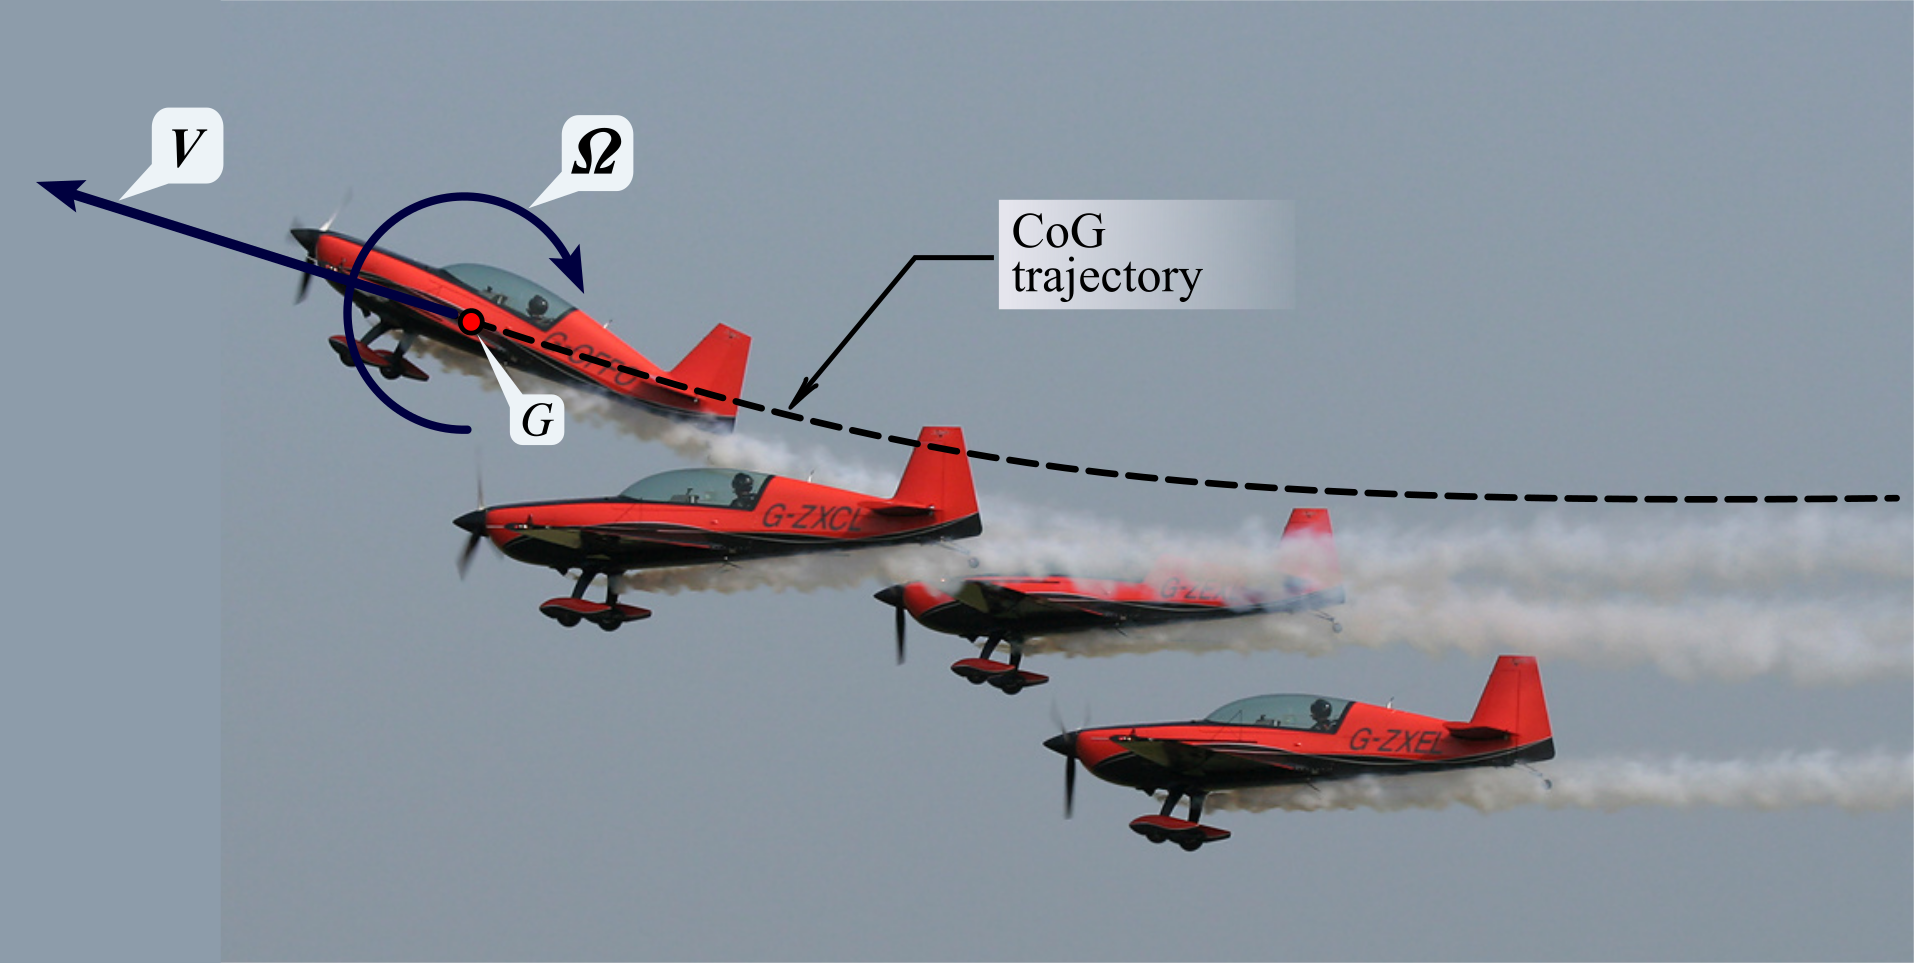 Aircraft CoG trajectory in a pull-up maneuver.